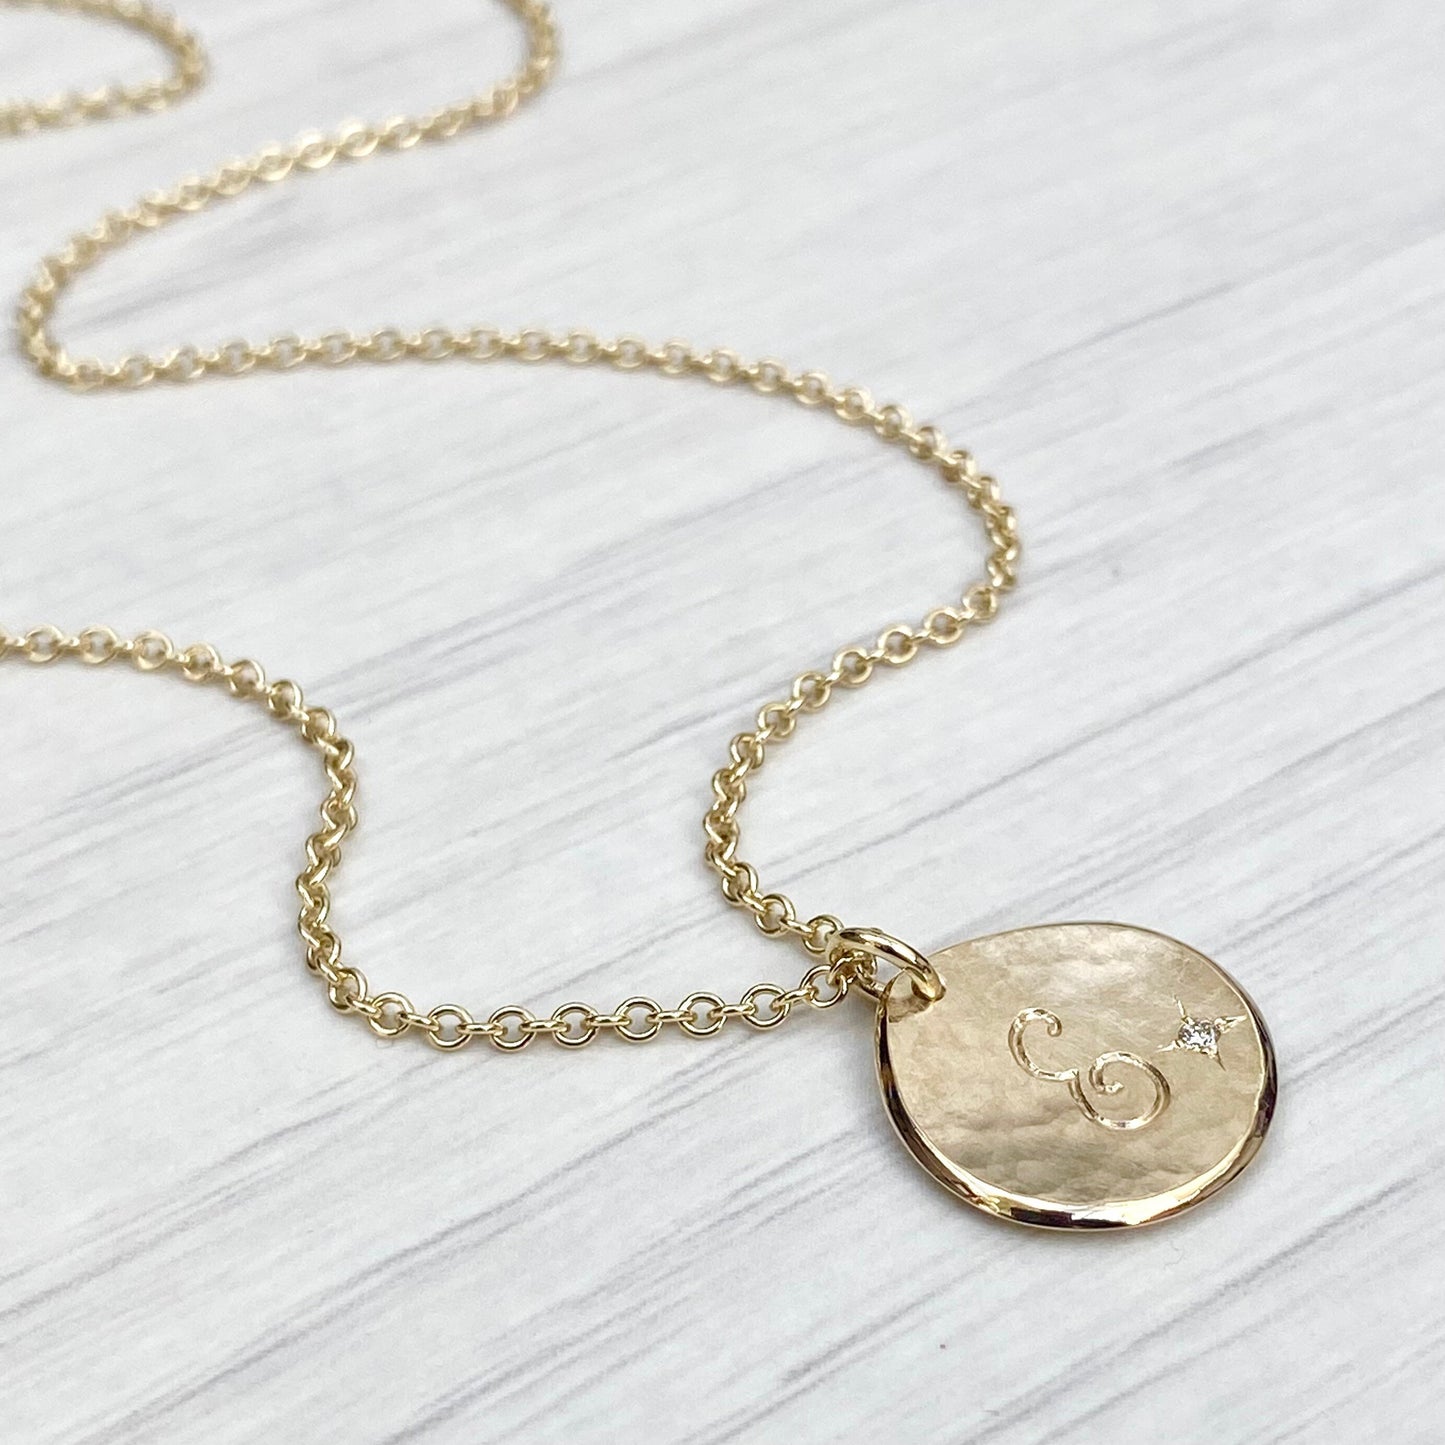 Handmade to order -  9ct solid yellow gold personalised 16mm diamond petal charm pendant on a 1.8mm wide trace chain